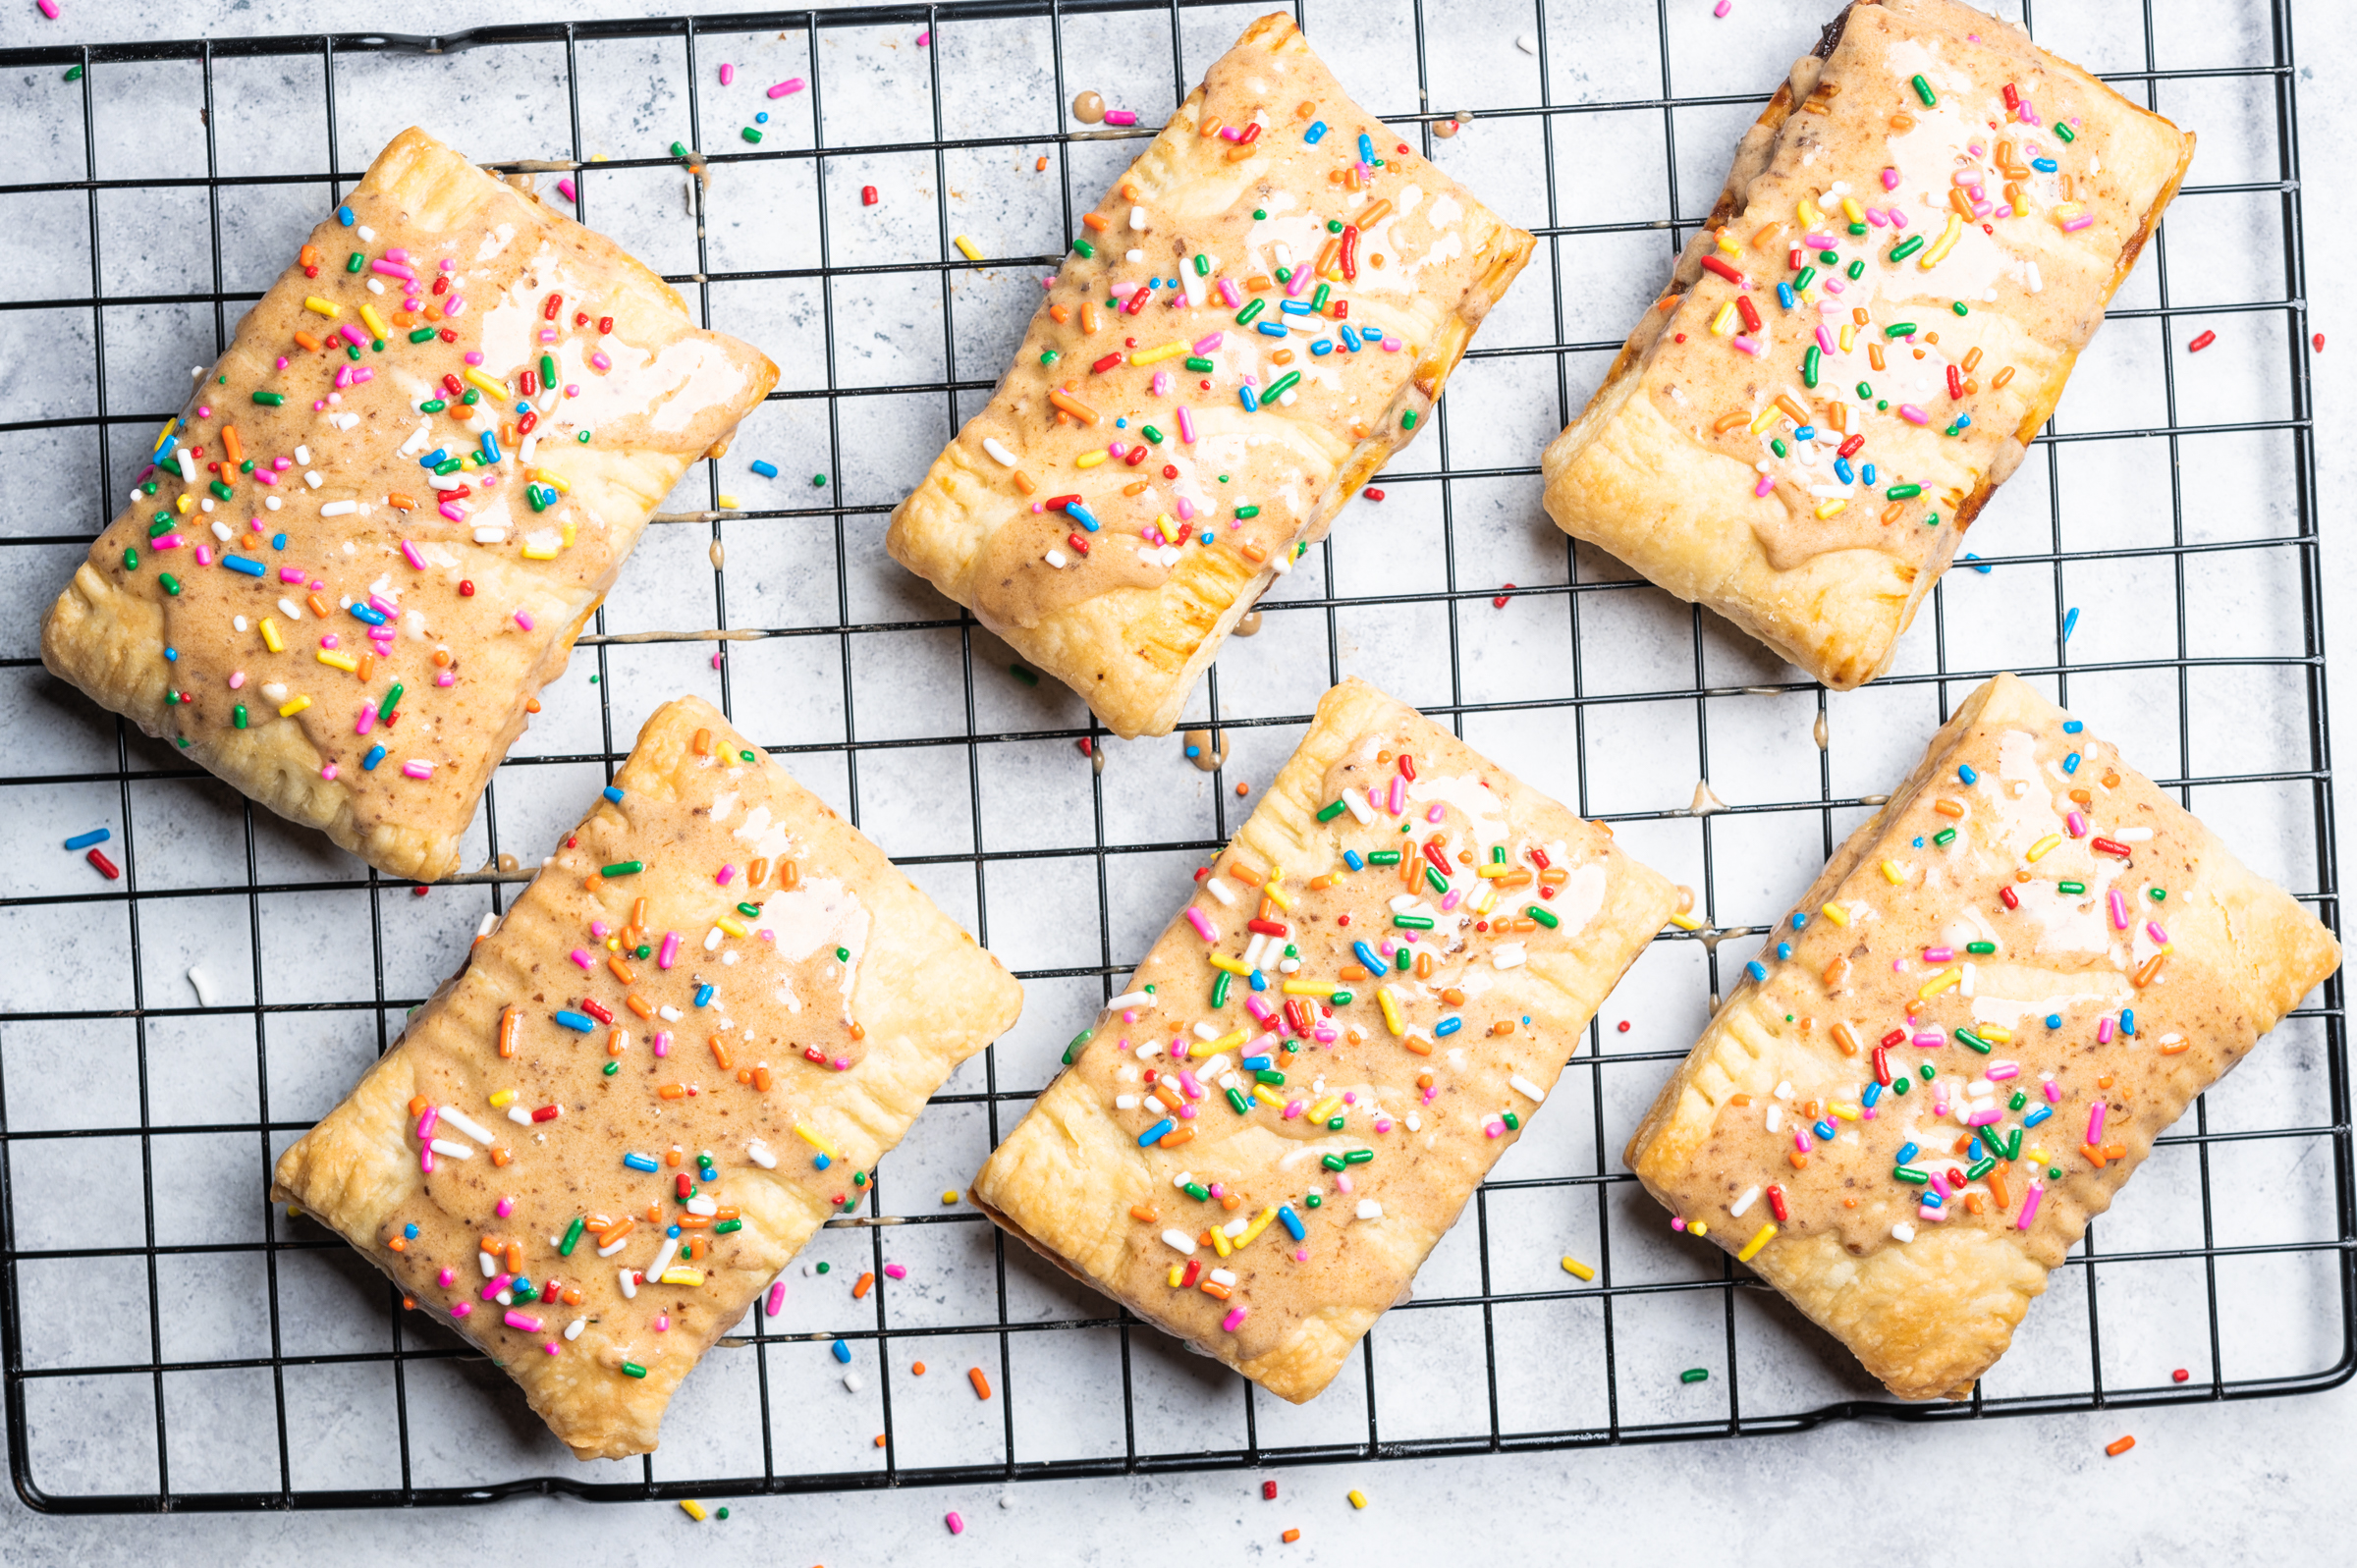 Baked and glazed prune pop tarts with sprinkles